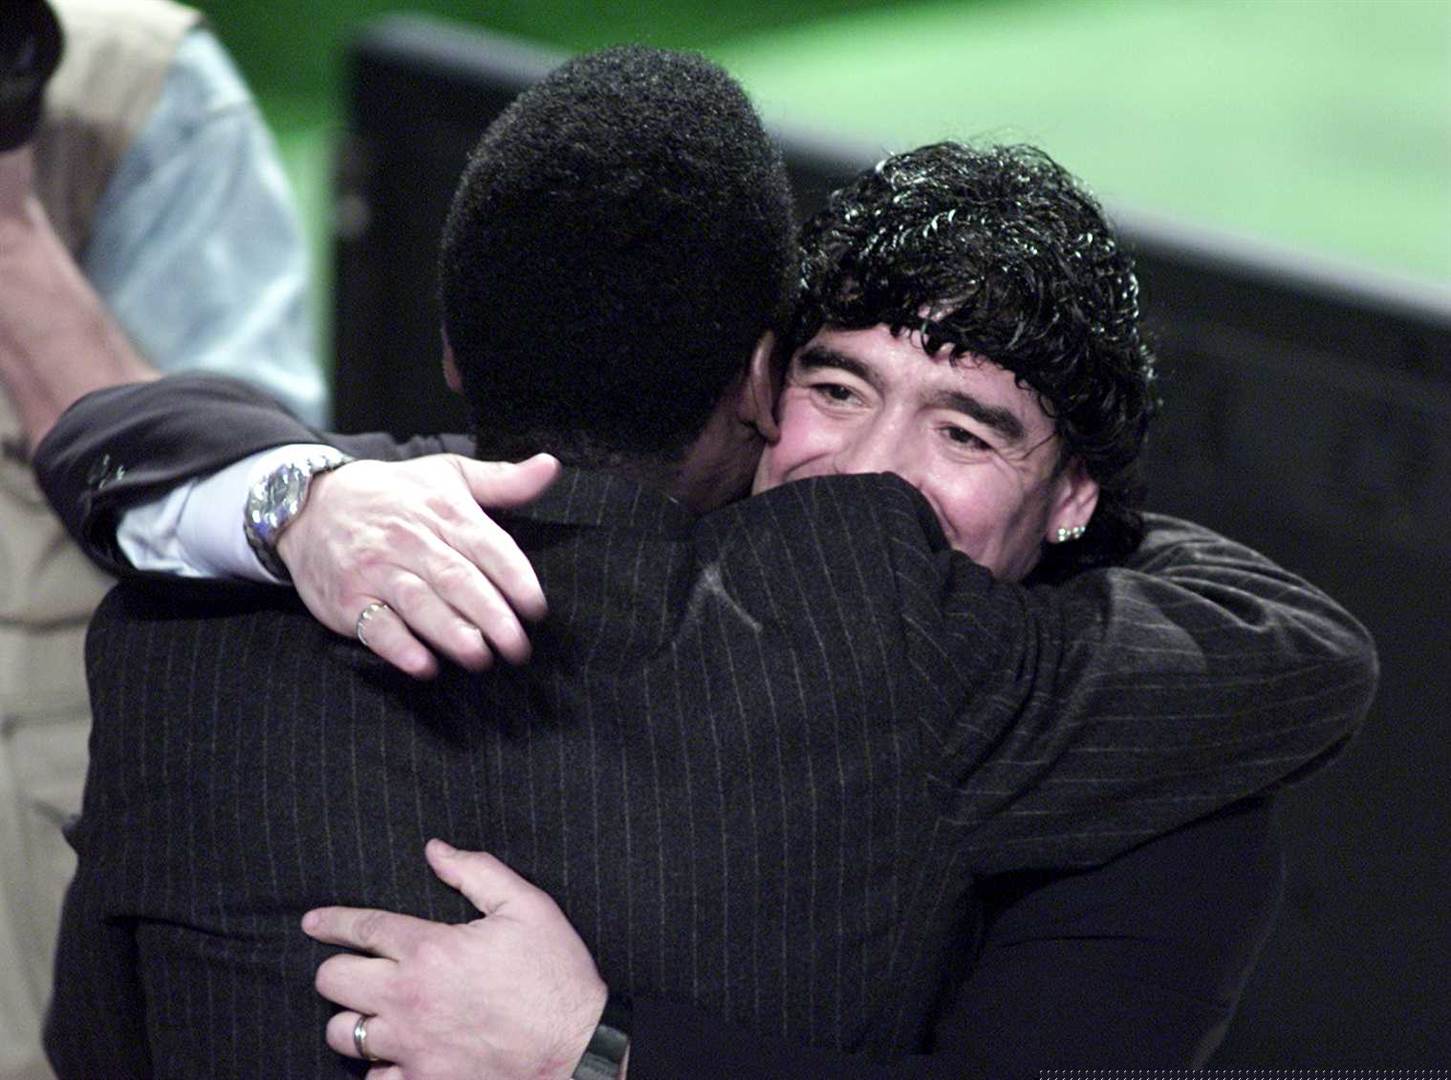 Rare Photo Of Maradona And Pele's First Meeting Surfaces On Social Media